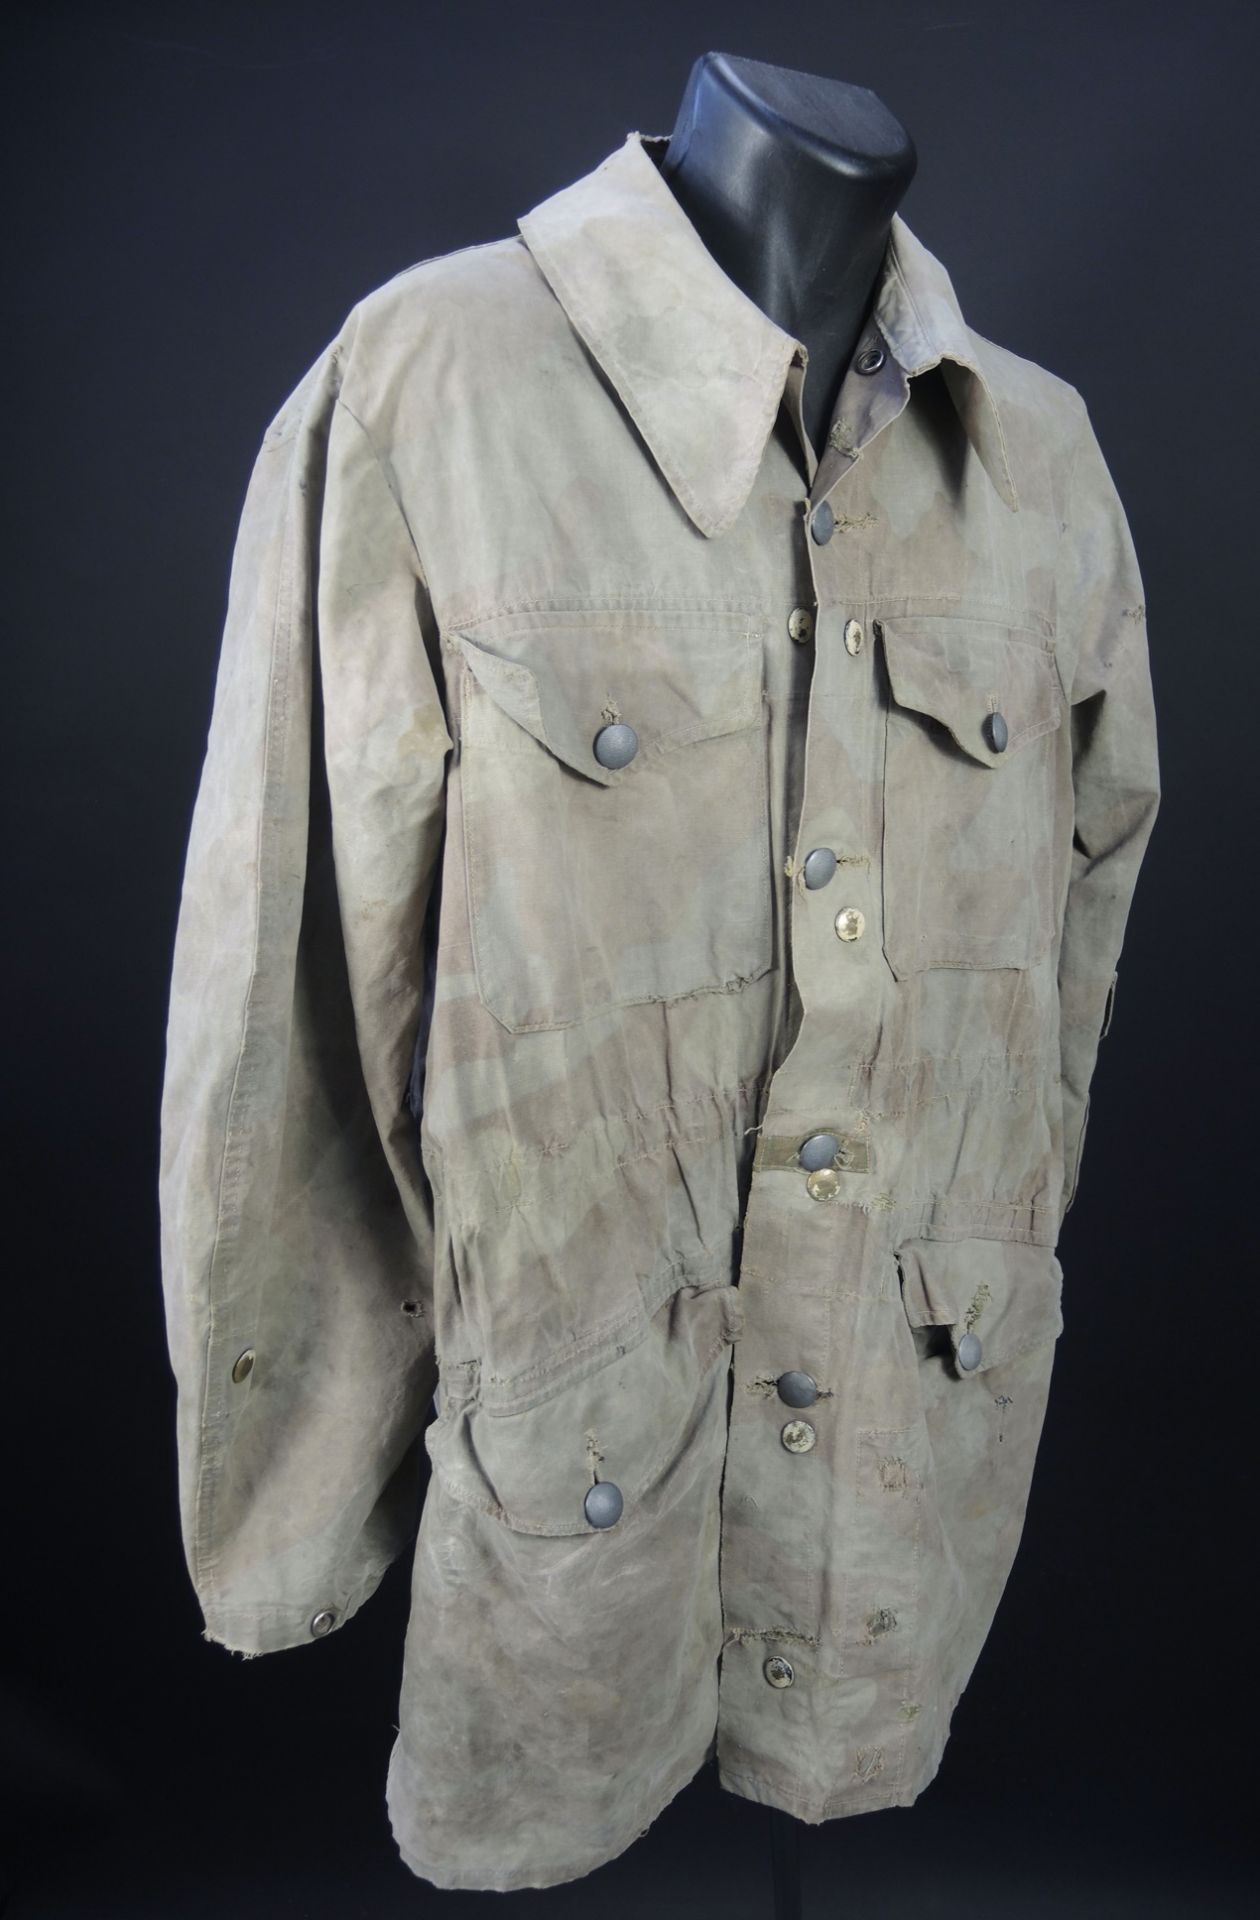 Blouson SS camoufle. Camouflaged SS jacket. - Image 2 of 5